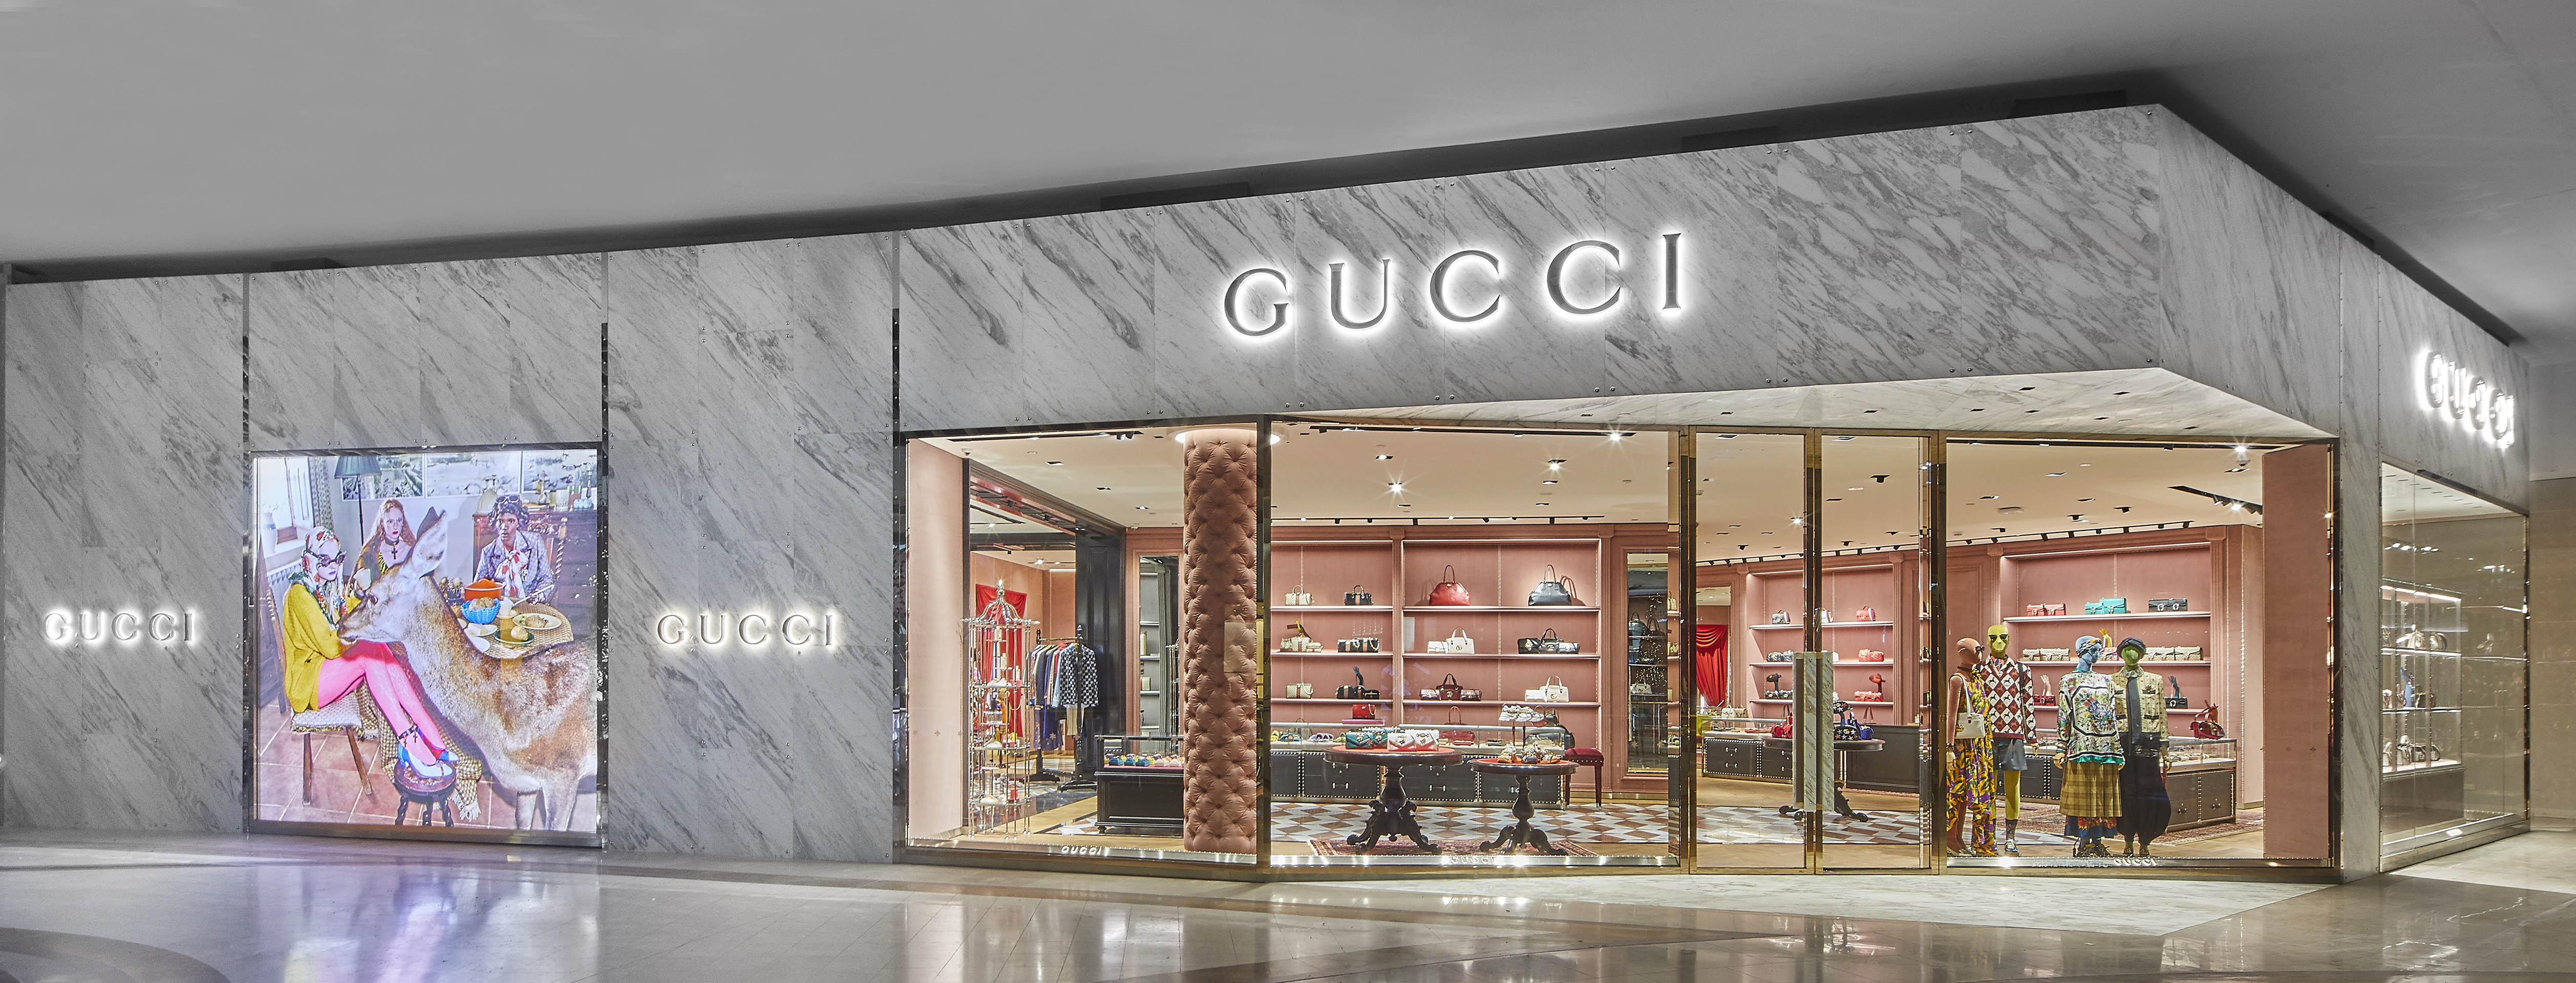 gucci chadstone hours off 60% - online 